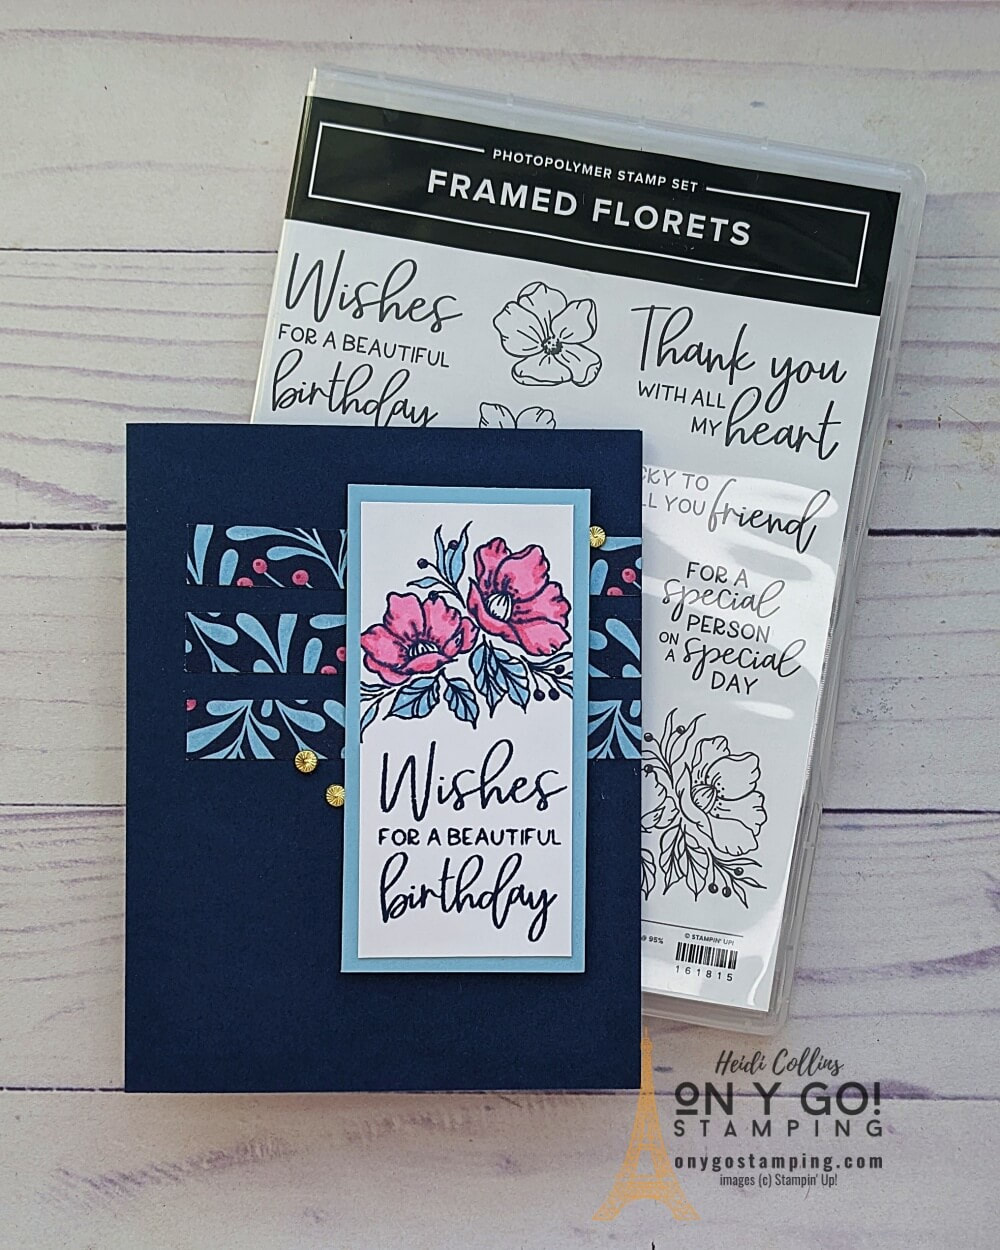 The new Framed Florets stamp set, dies, and patterned paper from Stampin' Up!® are absolutely fabulous! Find out how to get them before they are released in November.